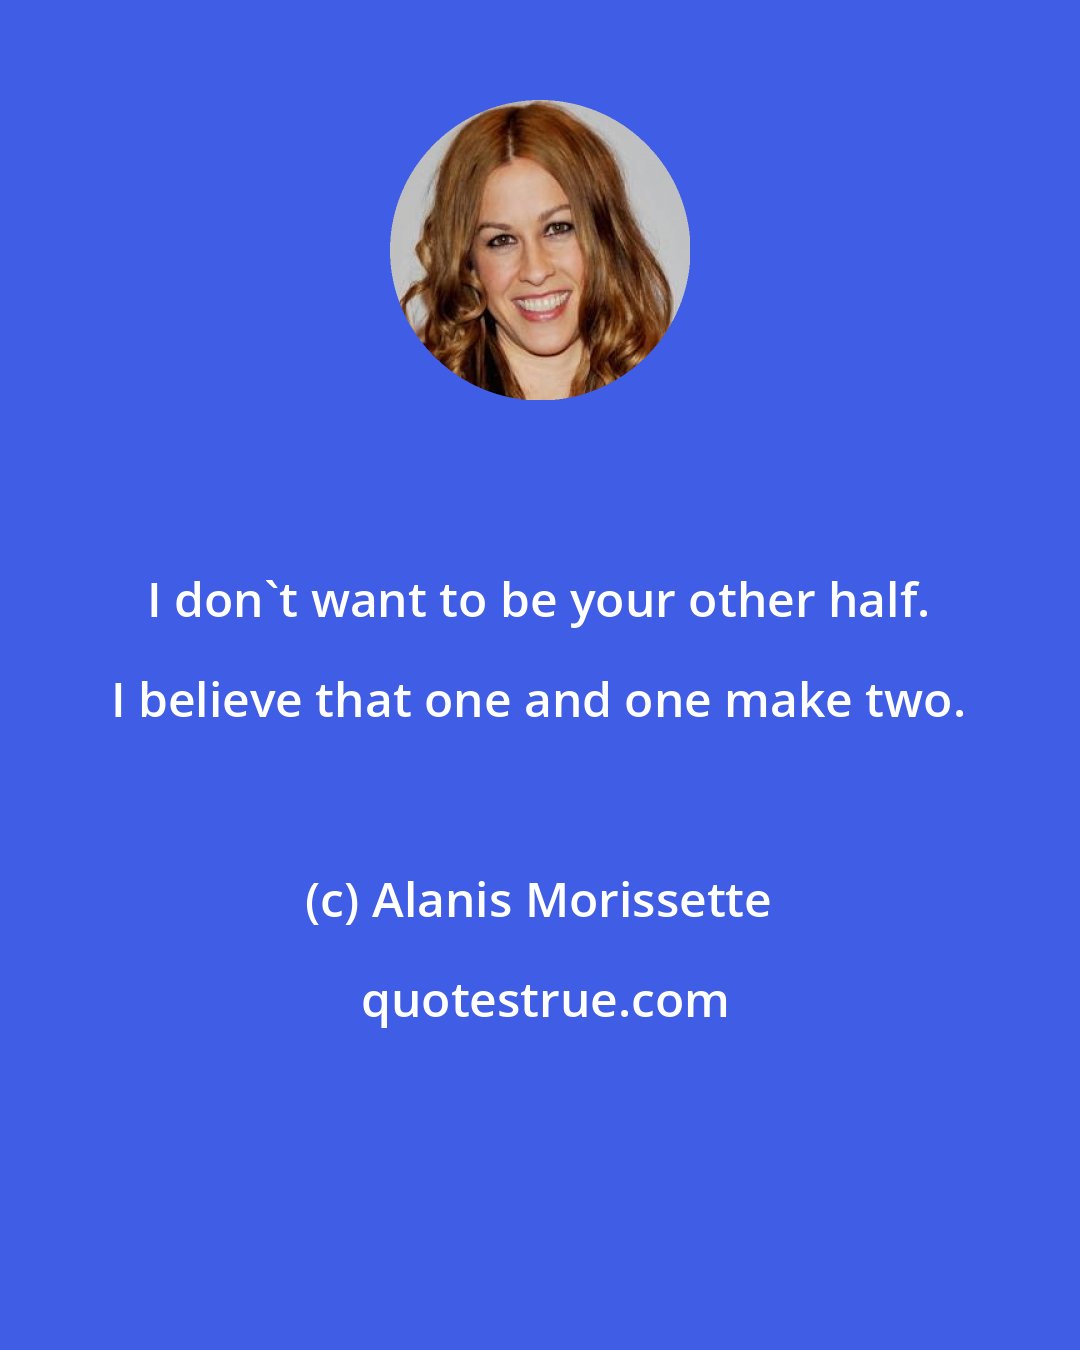 Alanis Morissette: I don't want to be your other half. I believe that one and one make two.